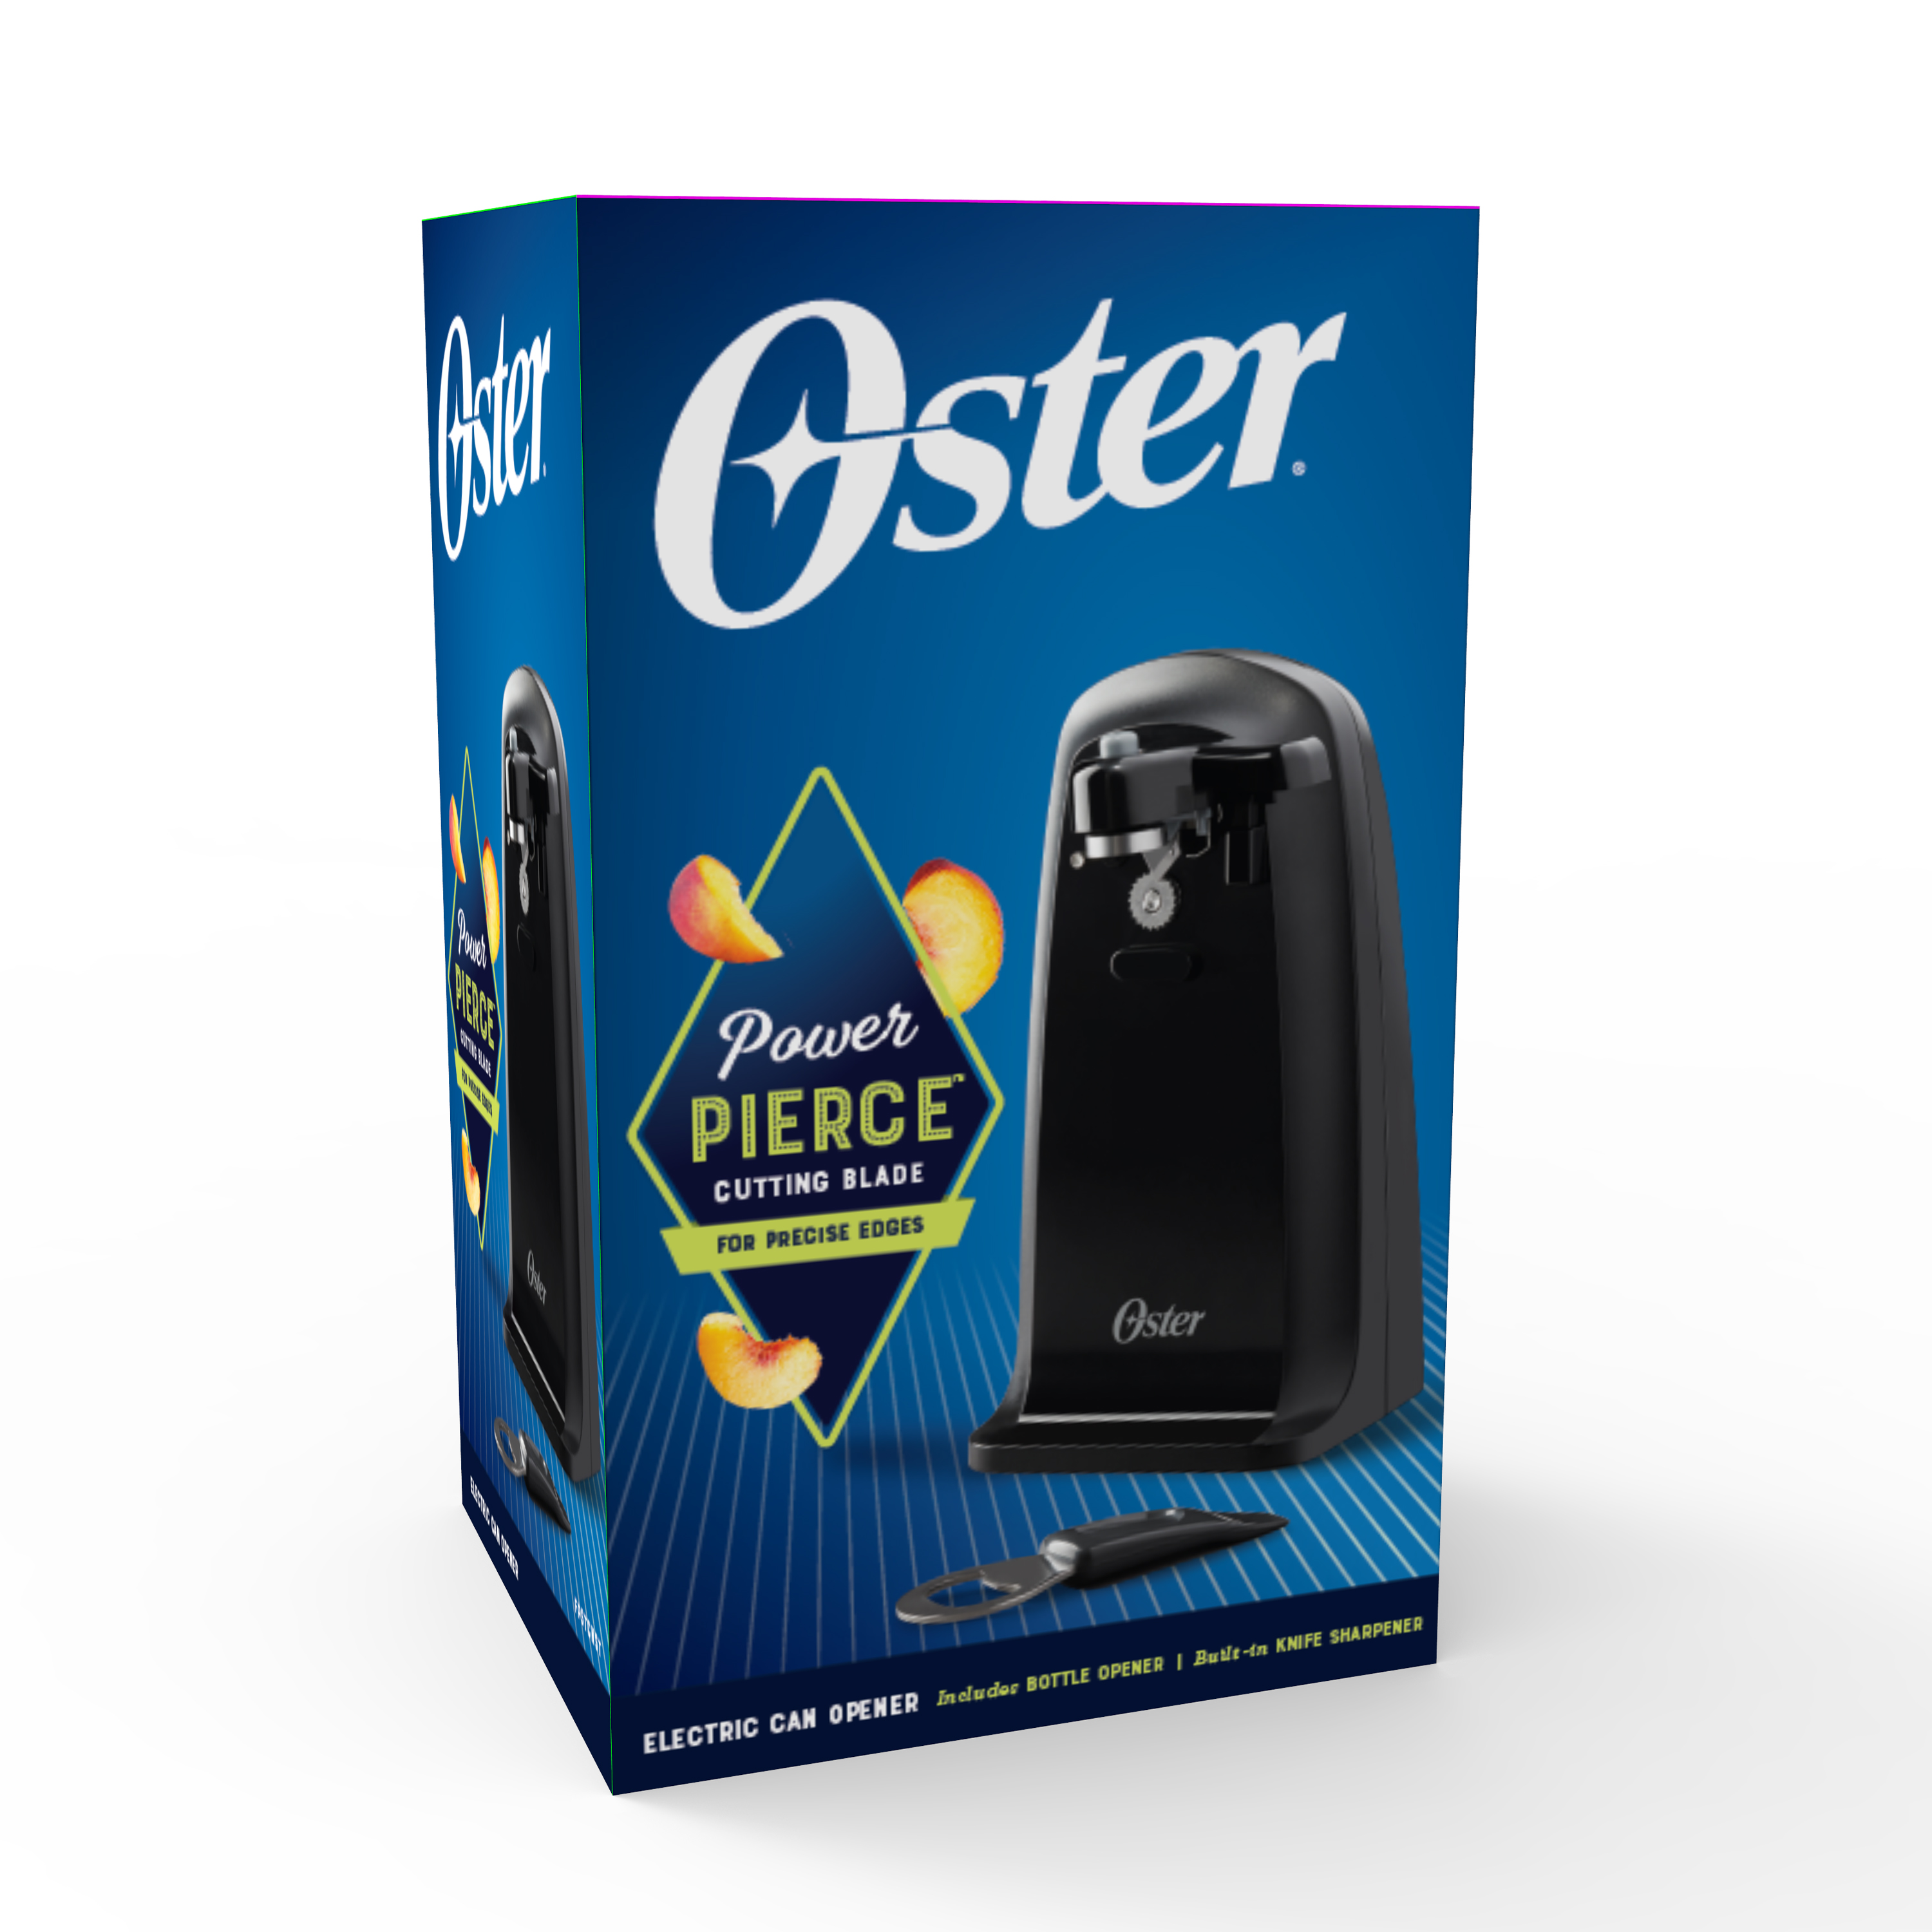 Oster Electric Can Opener with Power Pierce Cutting Blade for Precise Edges, Black - image 2 of 7